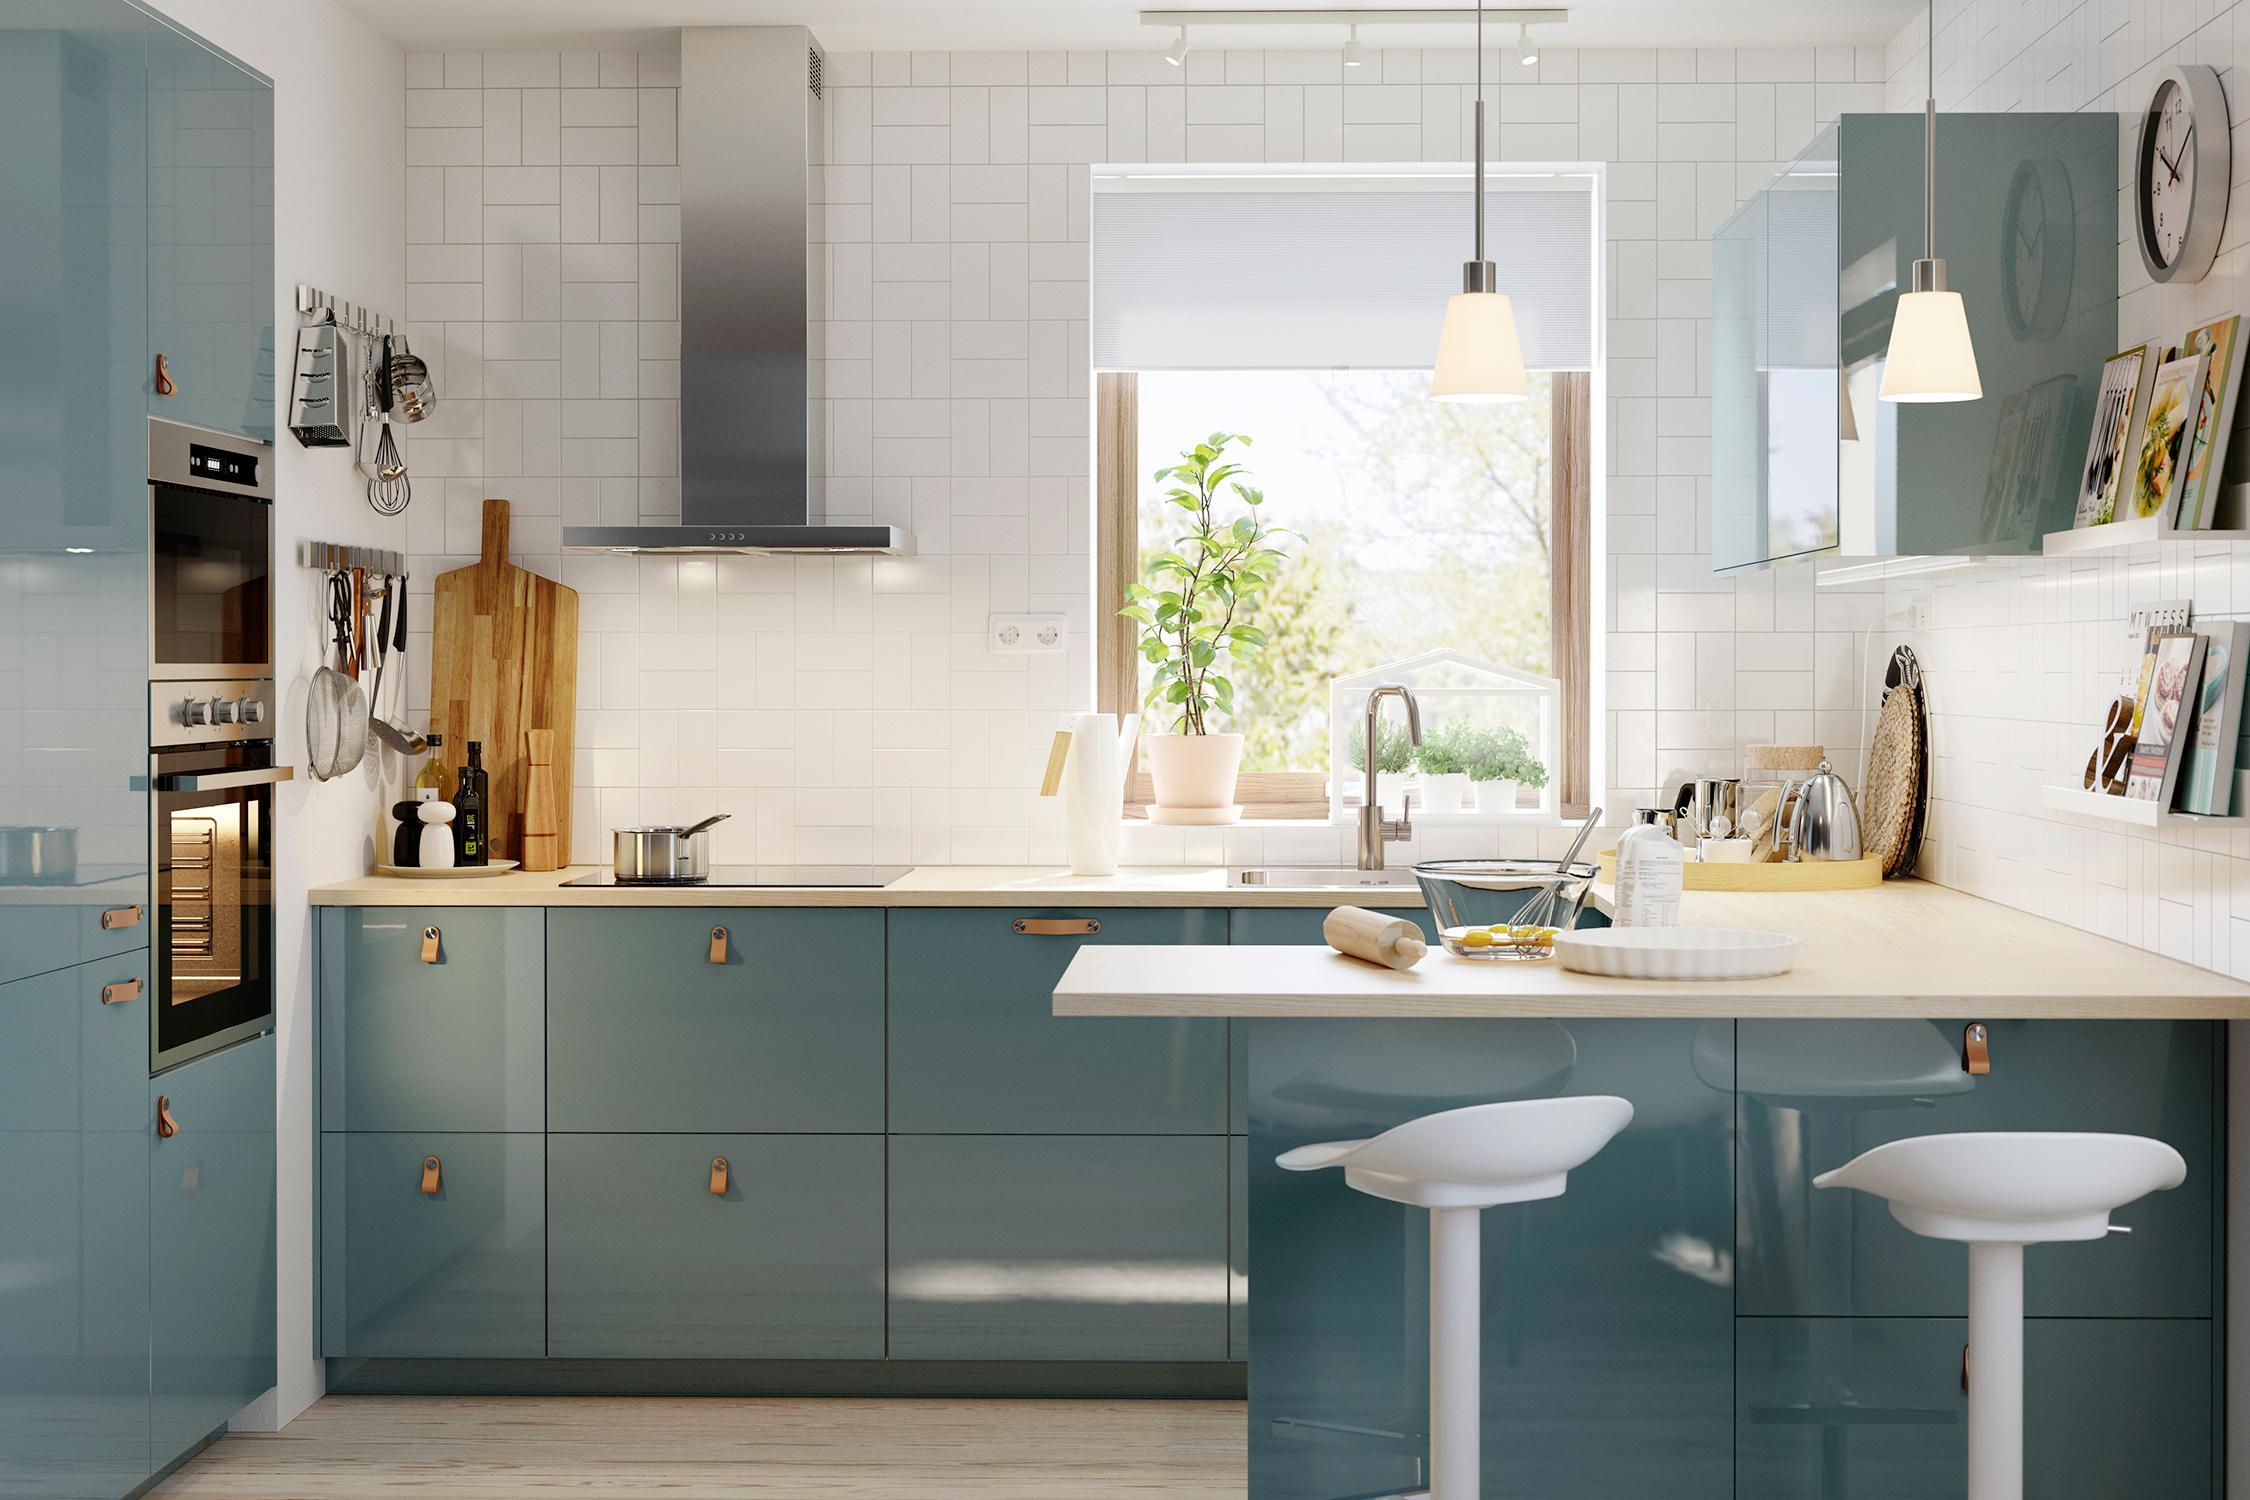 Top Kitchen Designs For 2019